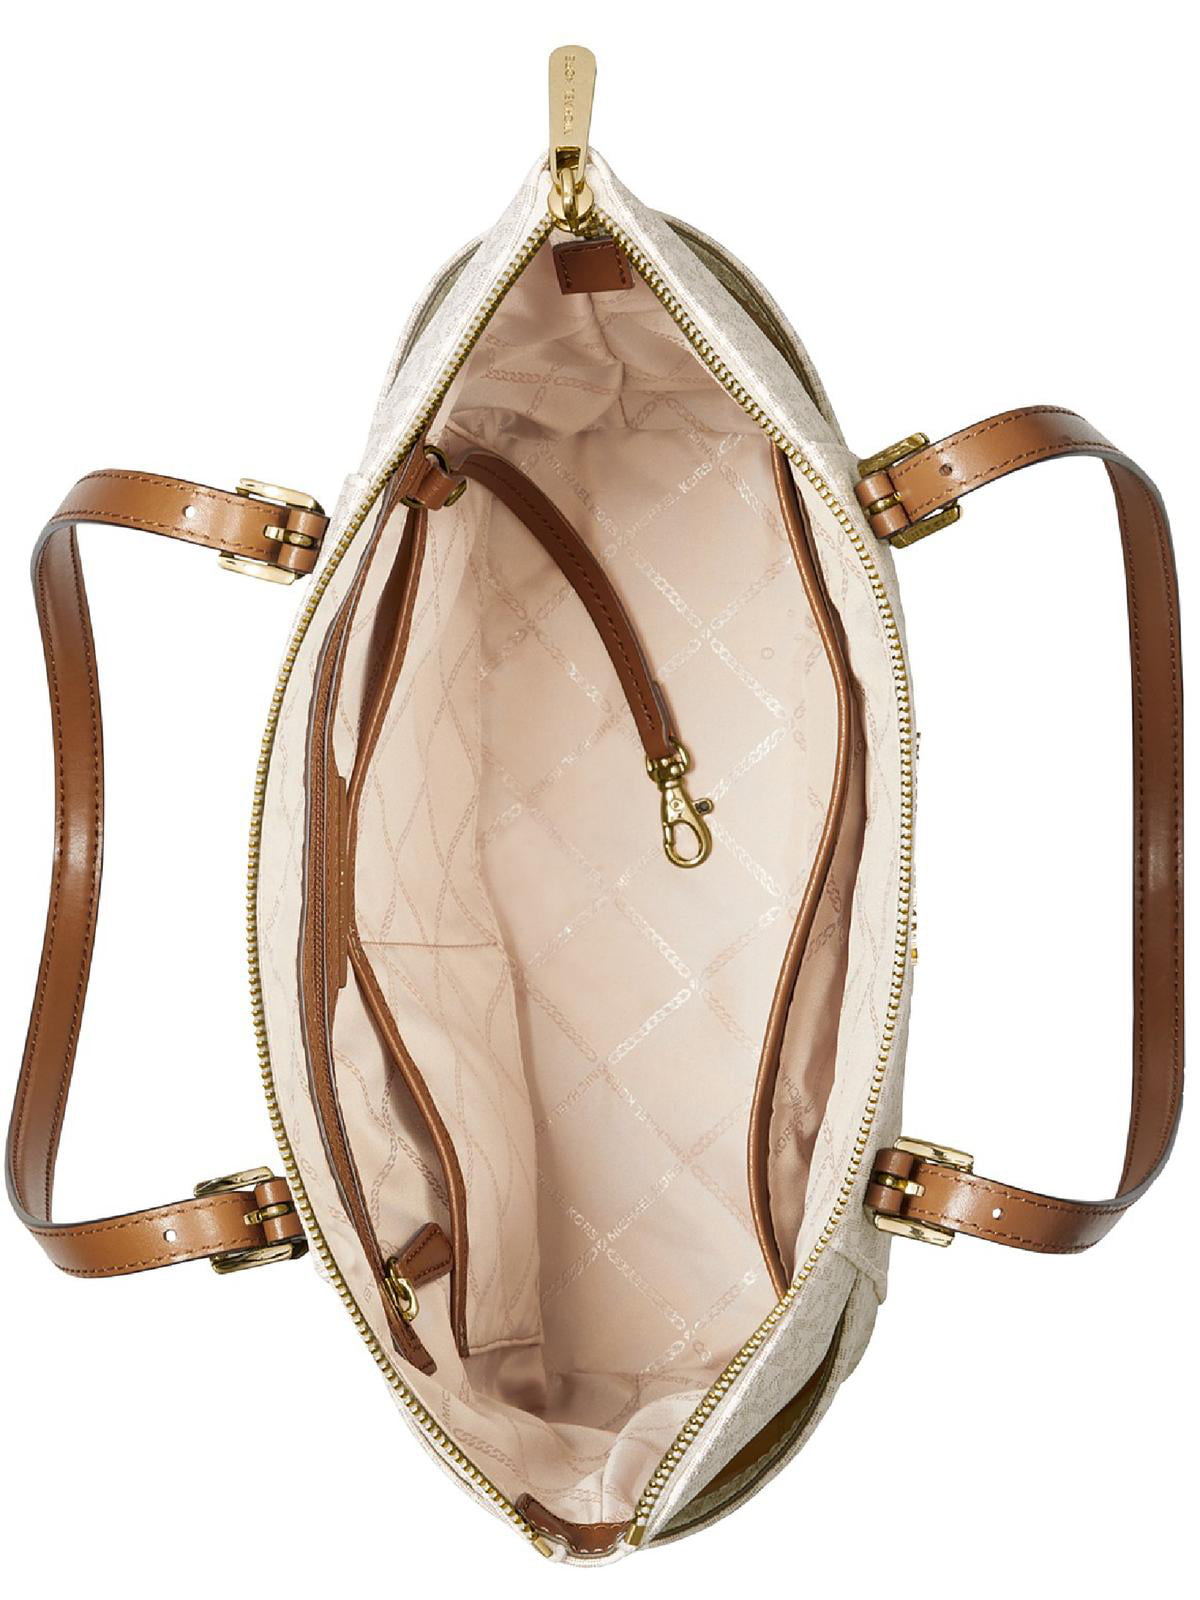  Michael Kors Nomad Large Multi Function Top Zip Tote  Vanilla/Acorn One Size : Clothing, Shoes & Jewelry